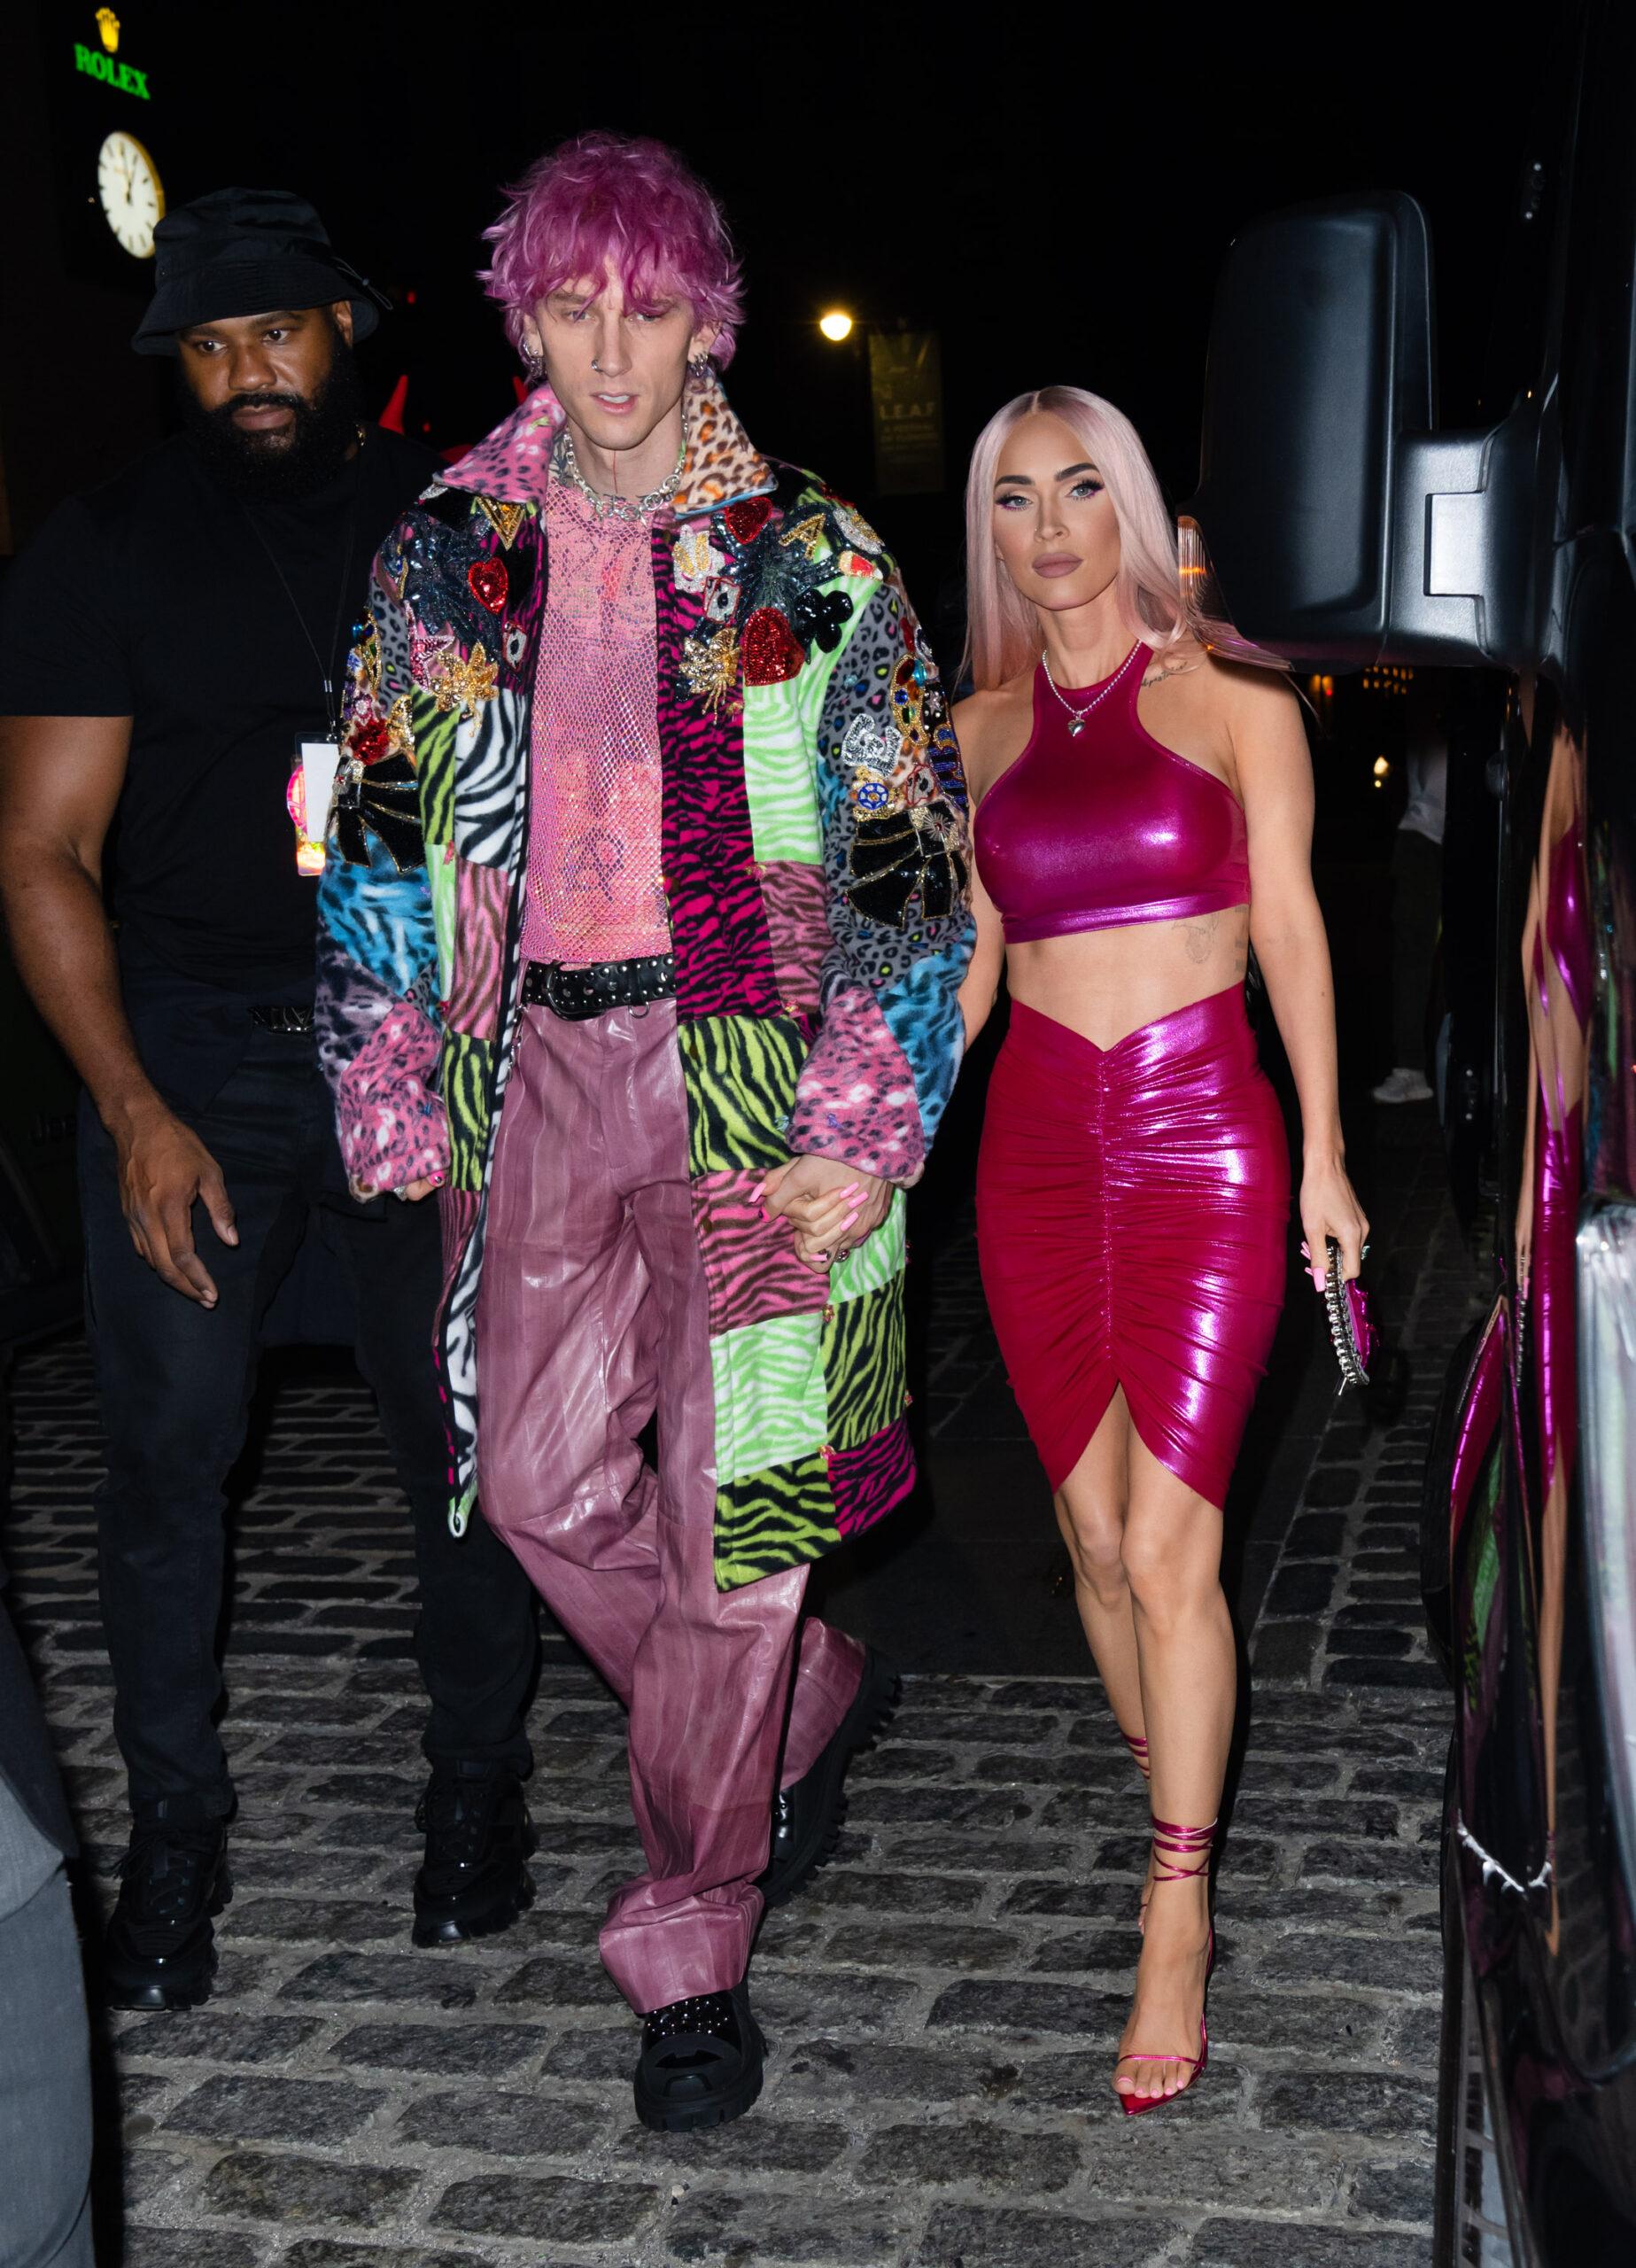 Machine Gun Kelly and Megan Fox attend the afterparty for his Madison Square Garden Show in New York